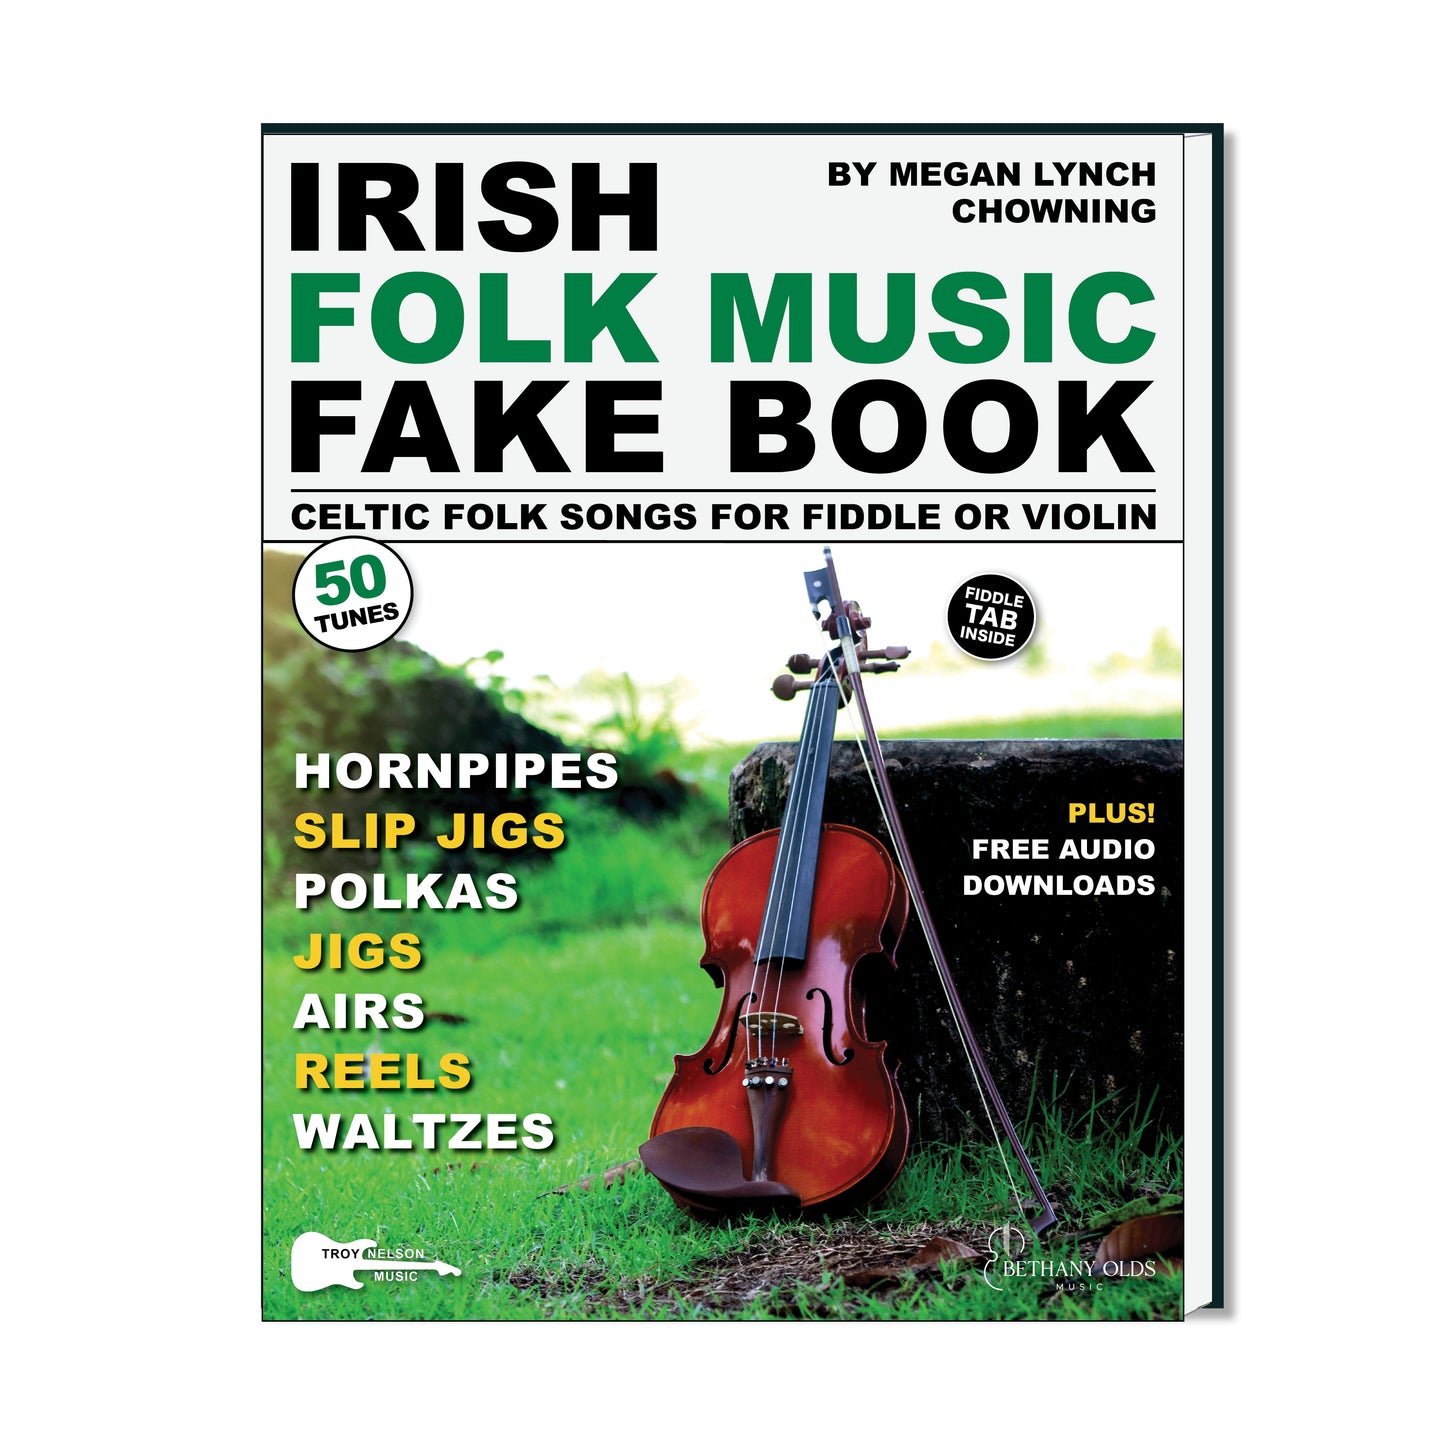 image of a fiddle on a Book Cover